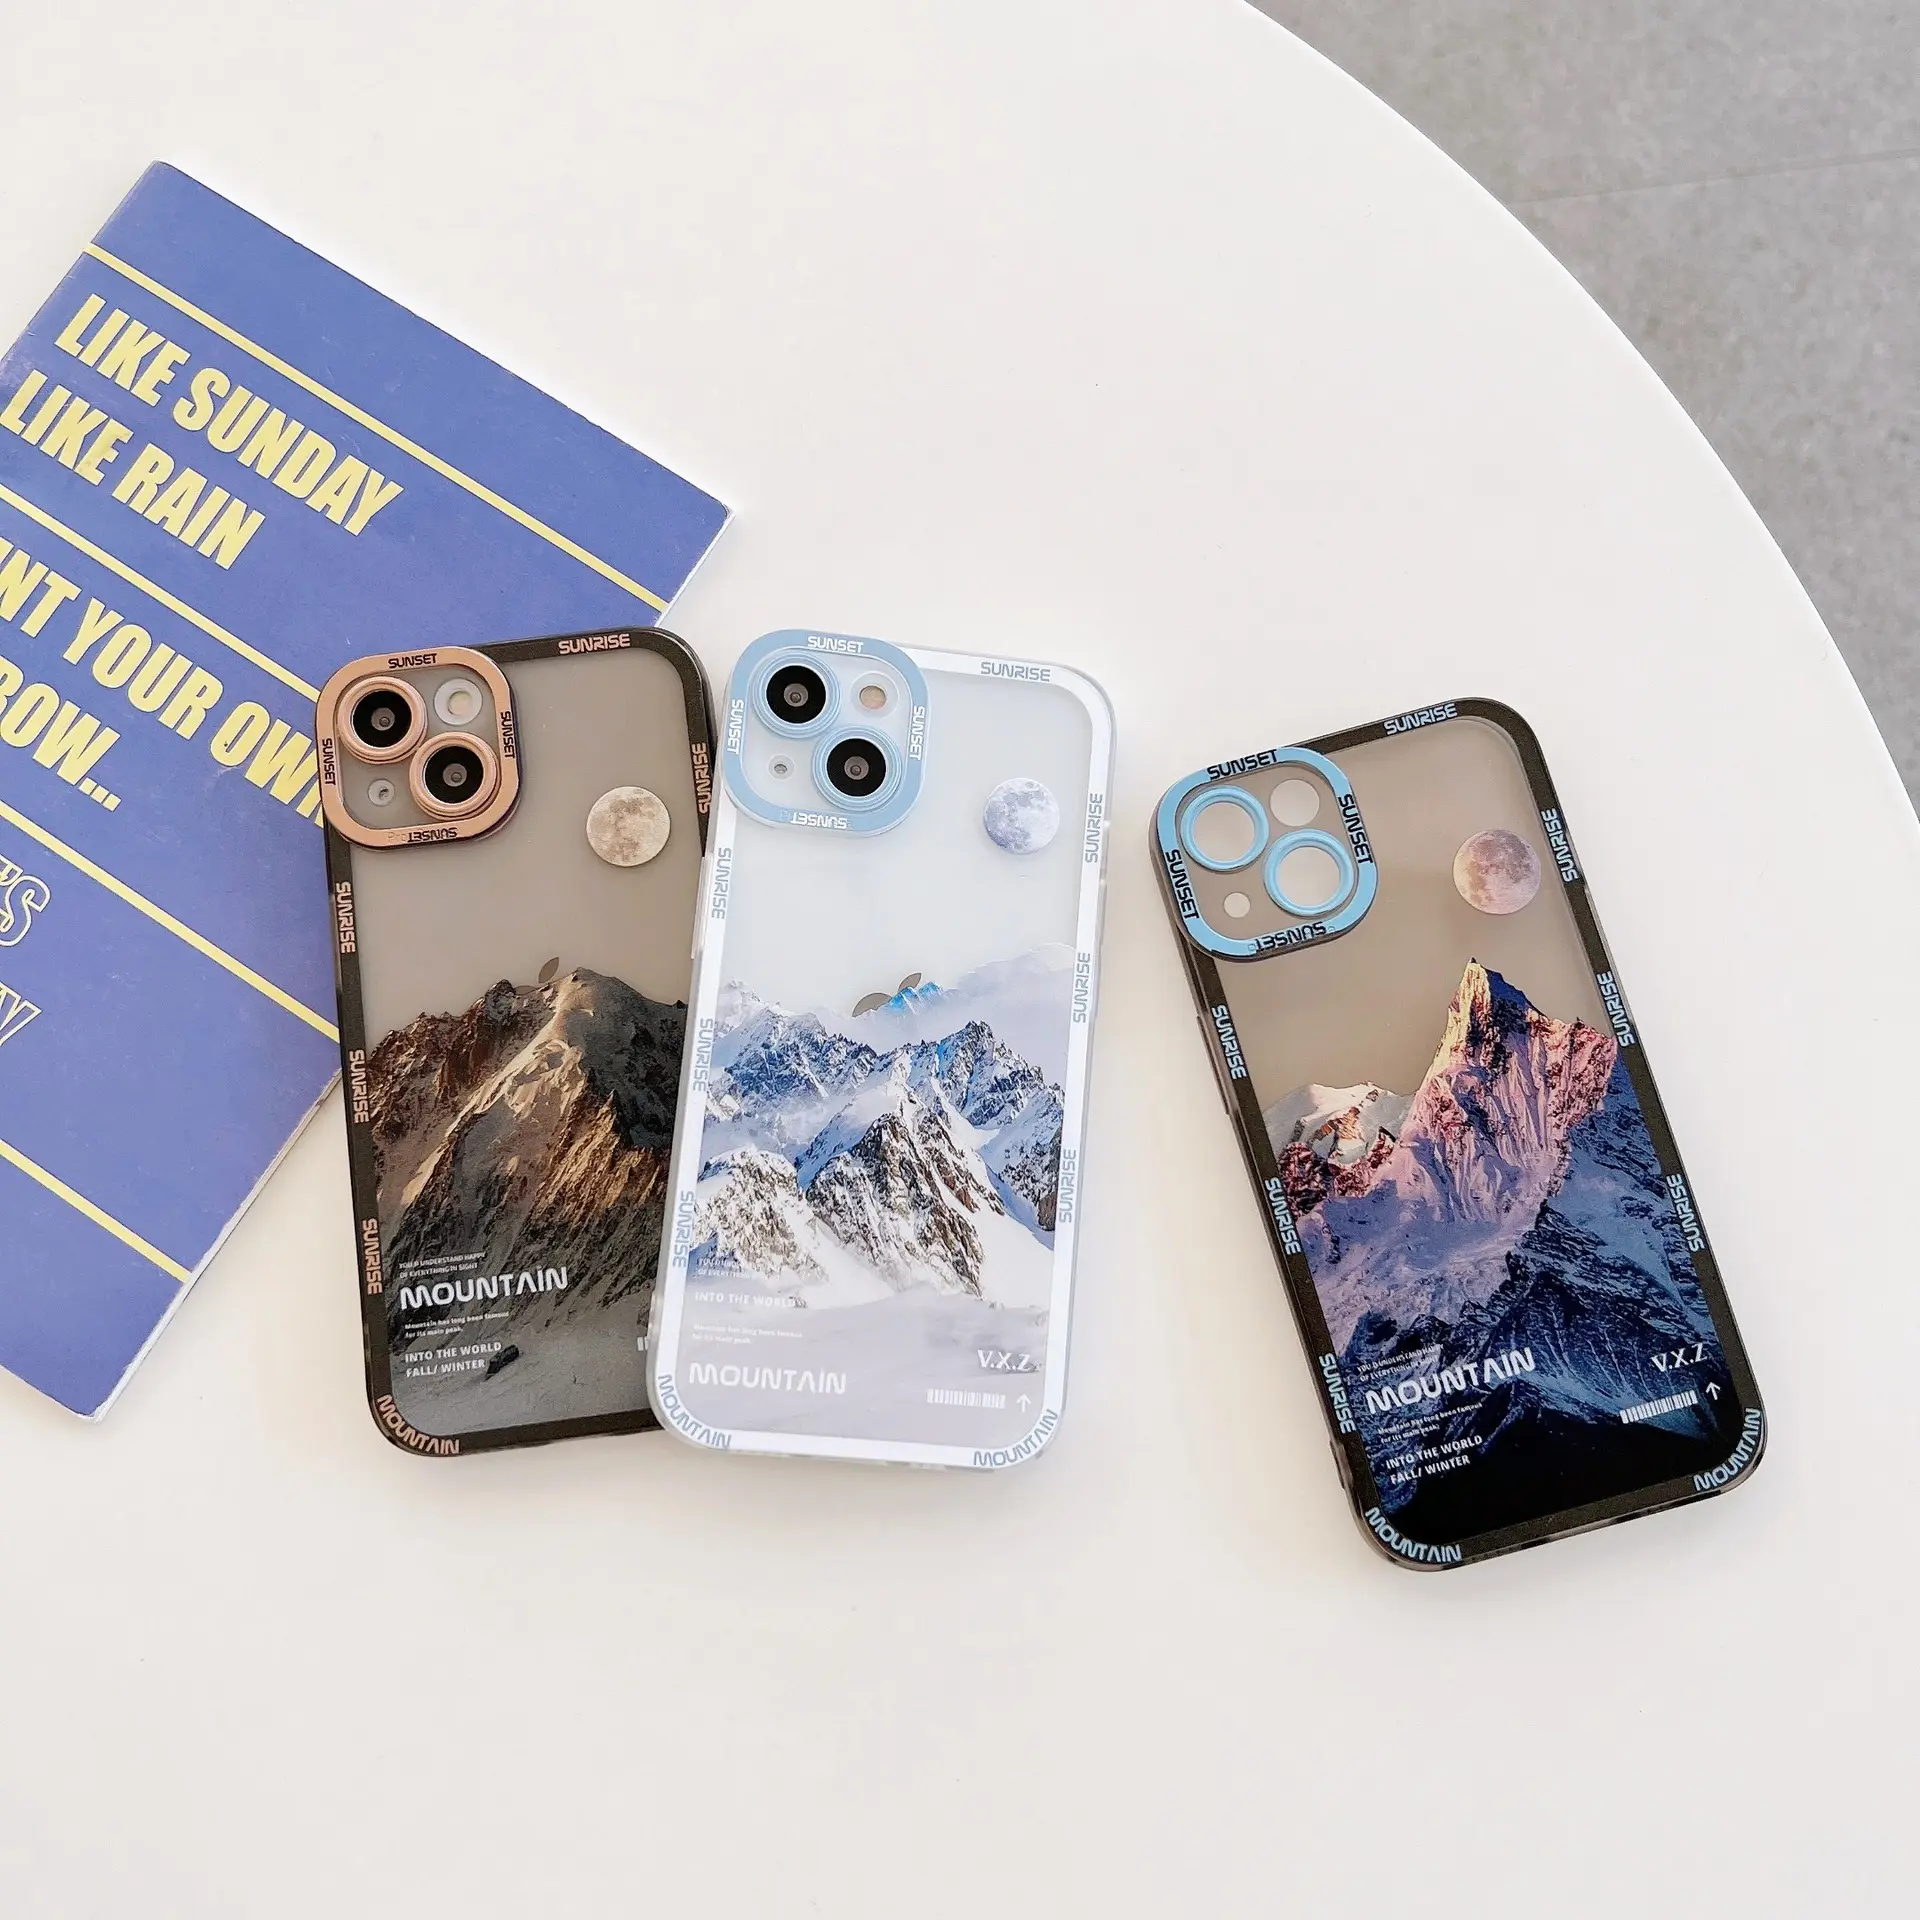 Snow Mountain Sunset Phone Case For iPhone 13 12 Mini 11 Pro Max XR X XS Max 7 8 Plus Soft Shockproof Bumper Clear Back Cover